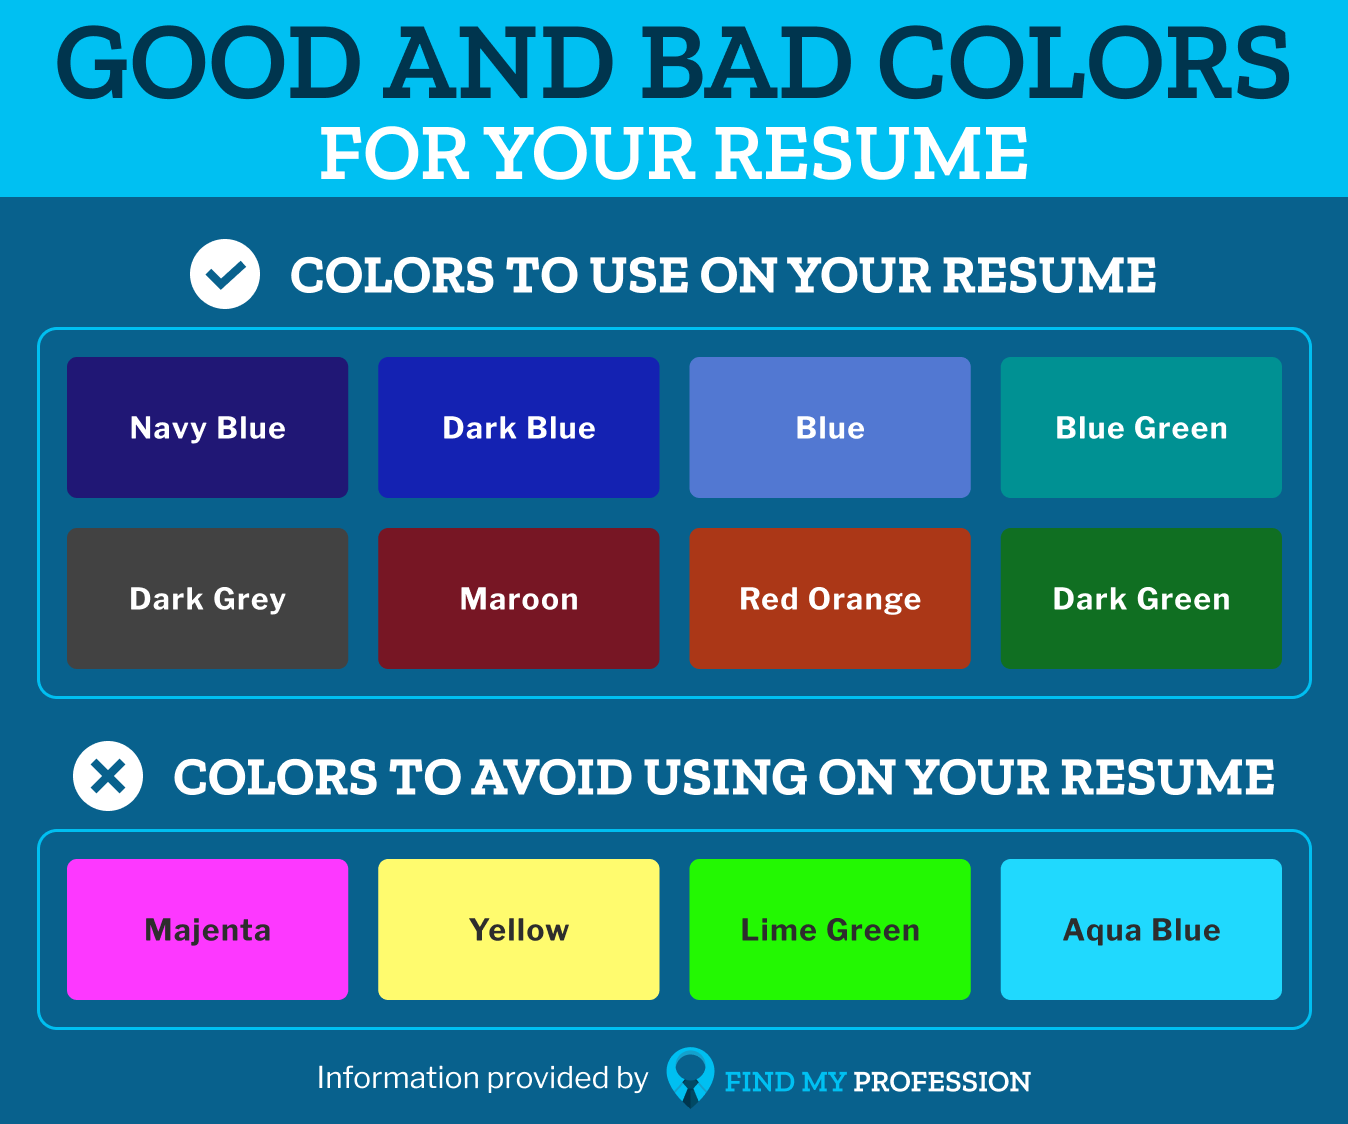 Good and Bad Colors For Your Resume